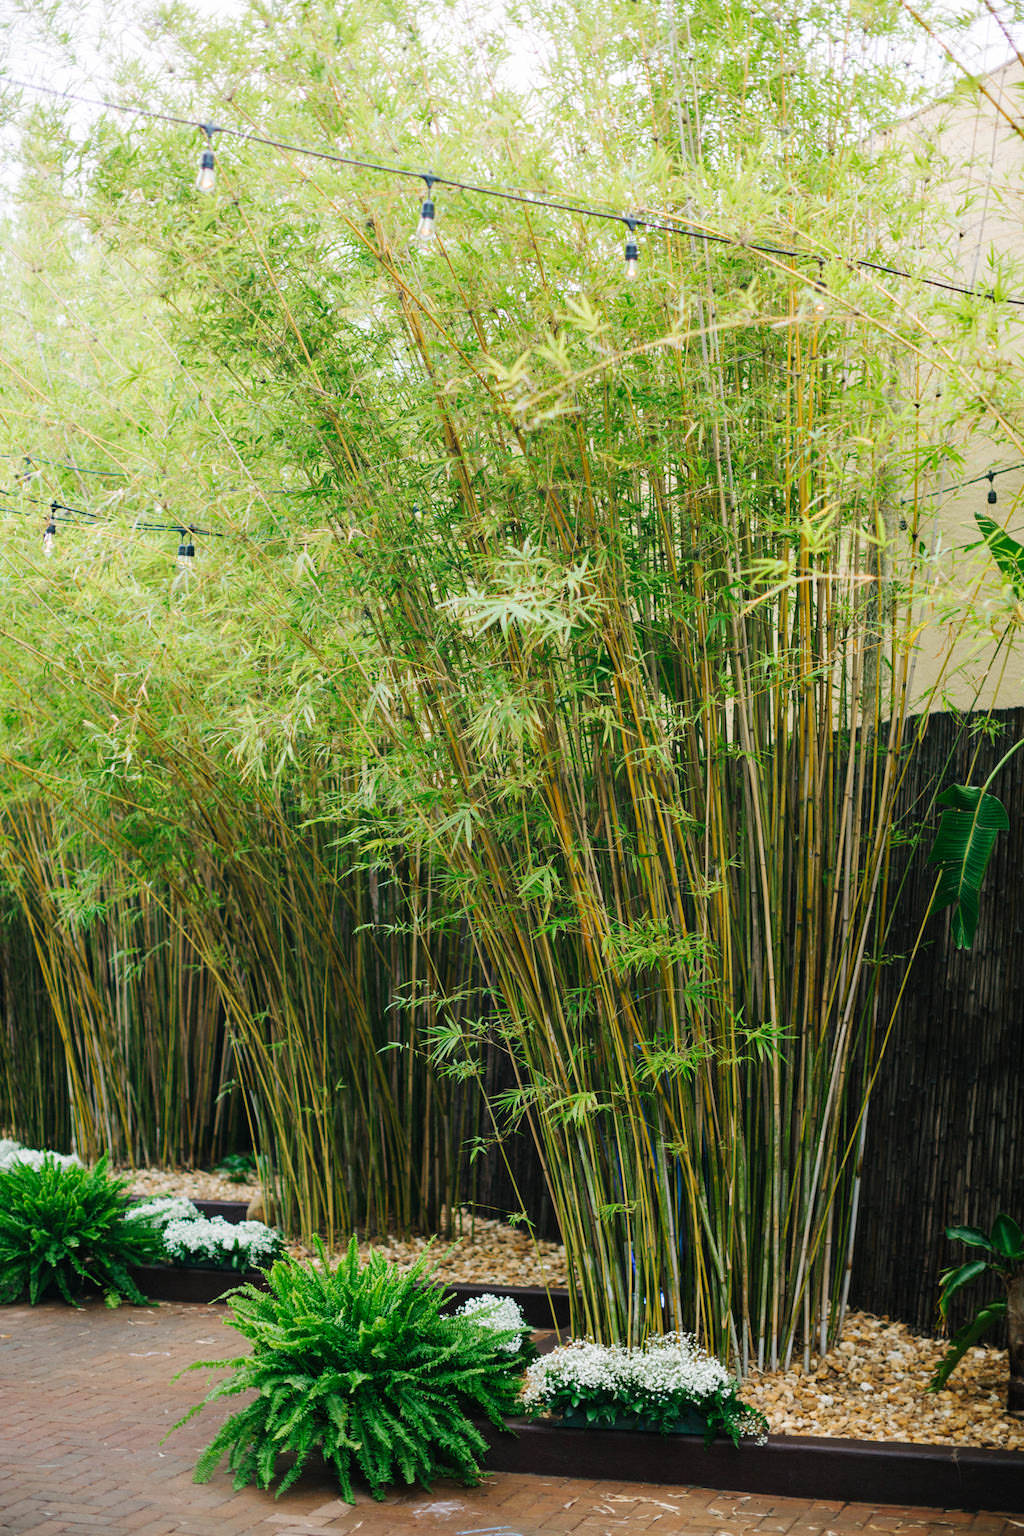 Exotic, Lush Tall Bamboo Garden in Courtyard, Greenery Floral Wedding Decor, Outdoor String Lights | Downtown St. Pete Unique Wedding Venue NOVA 535